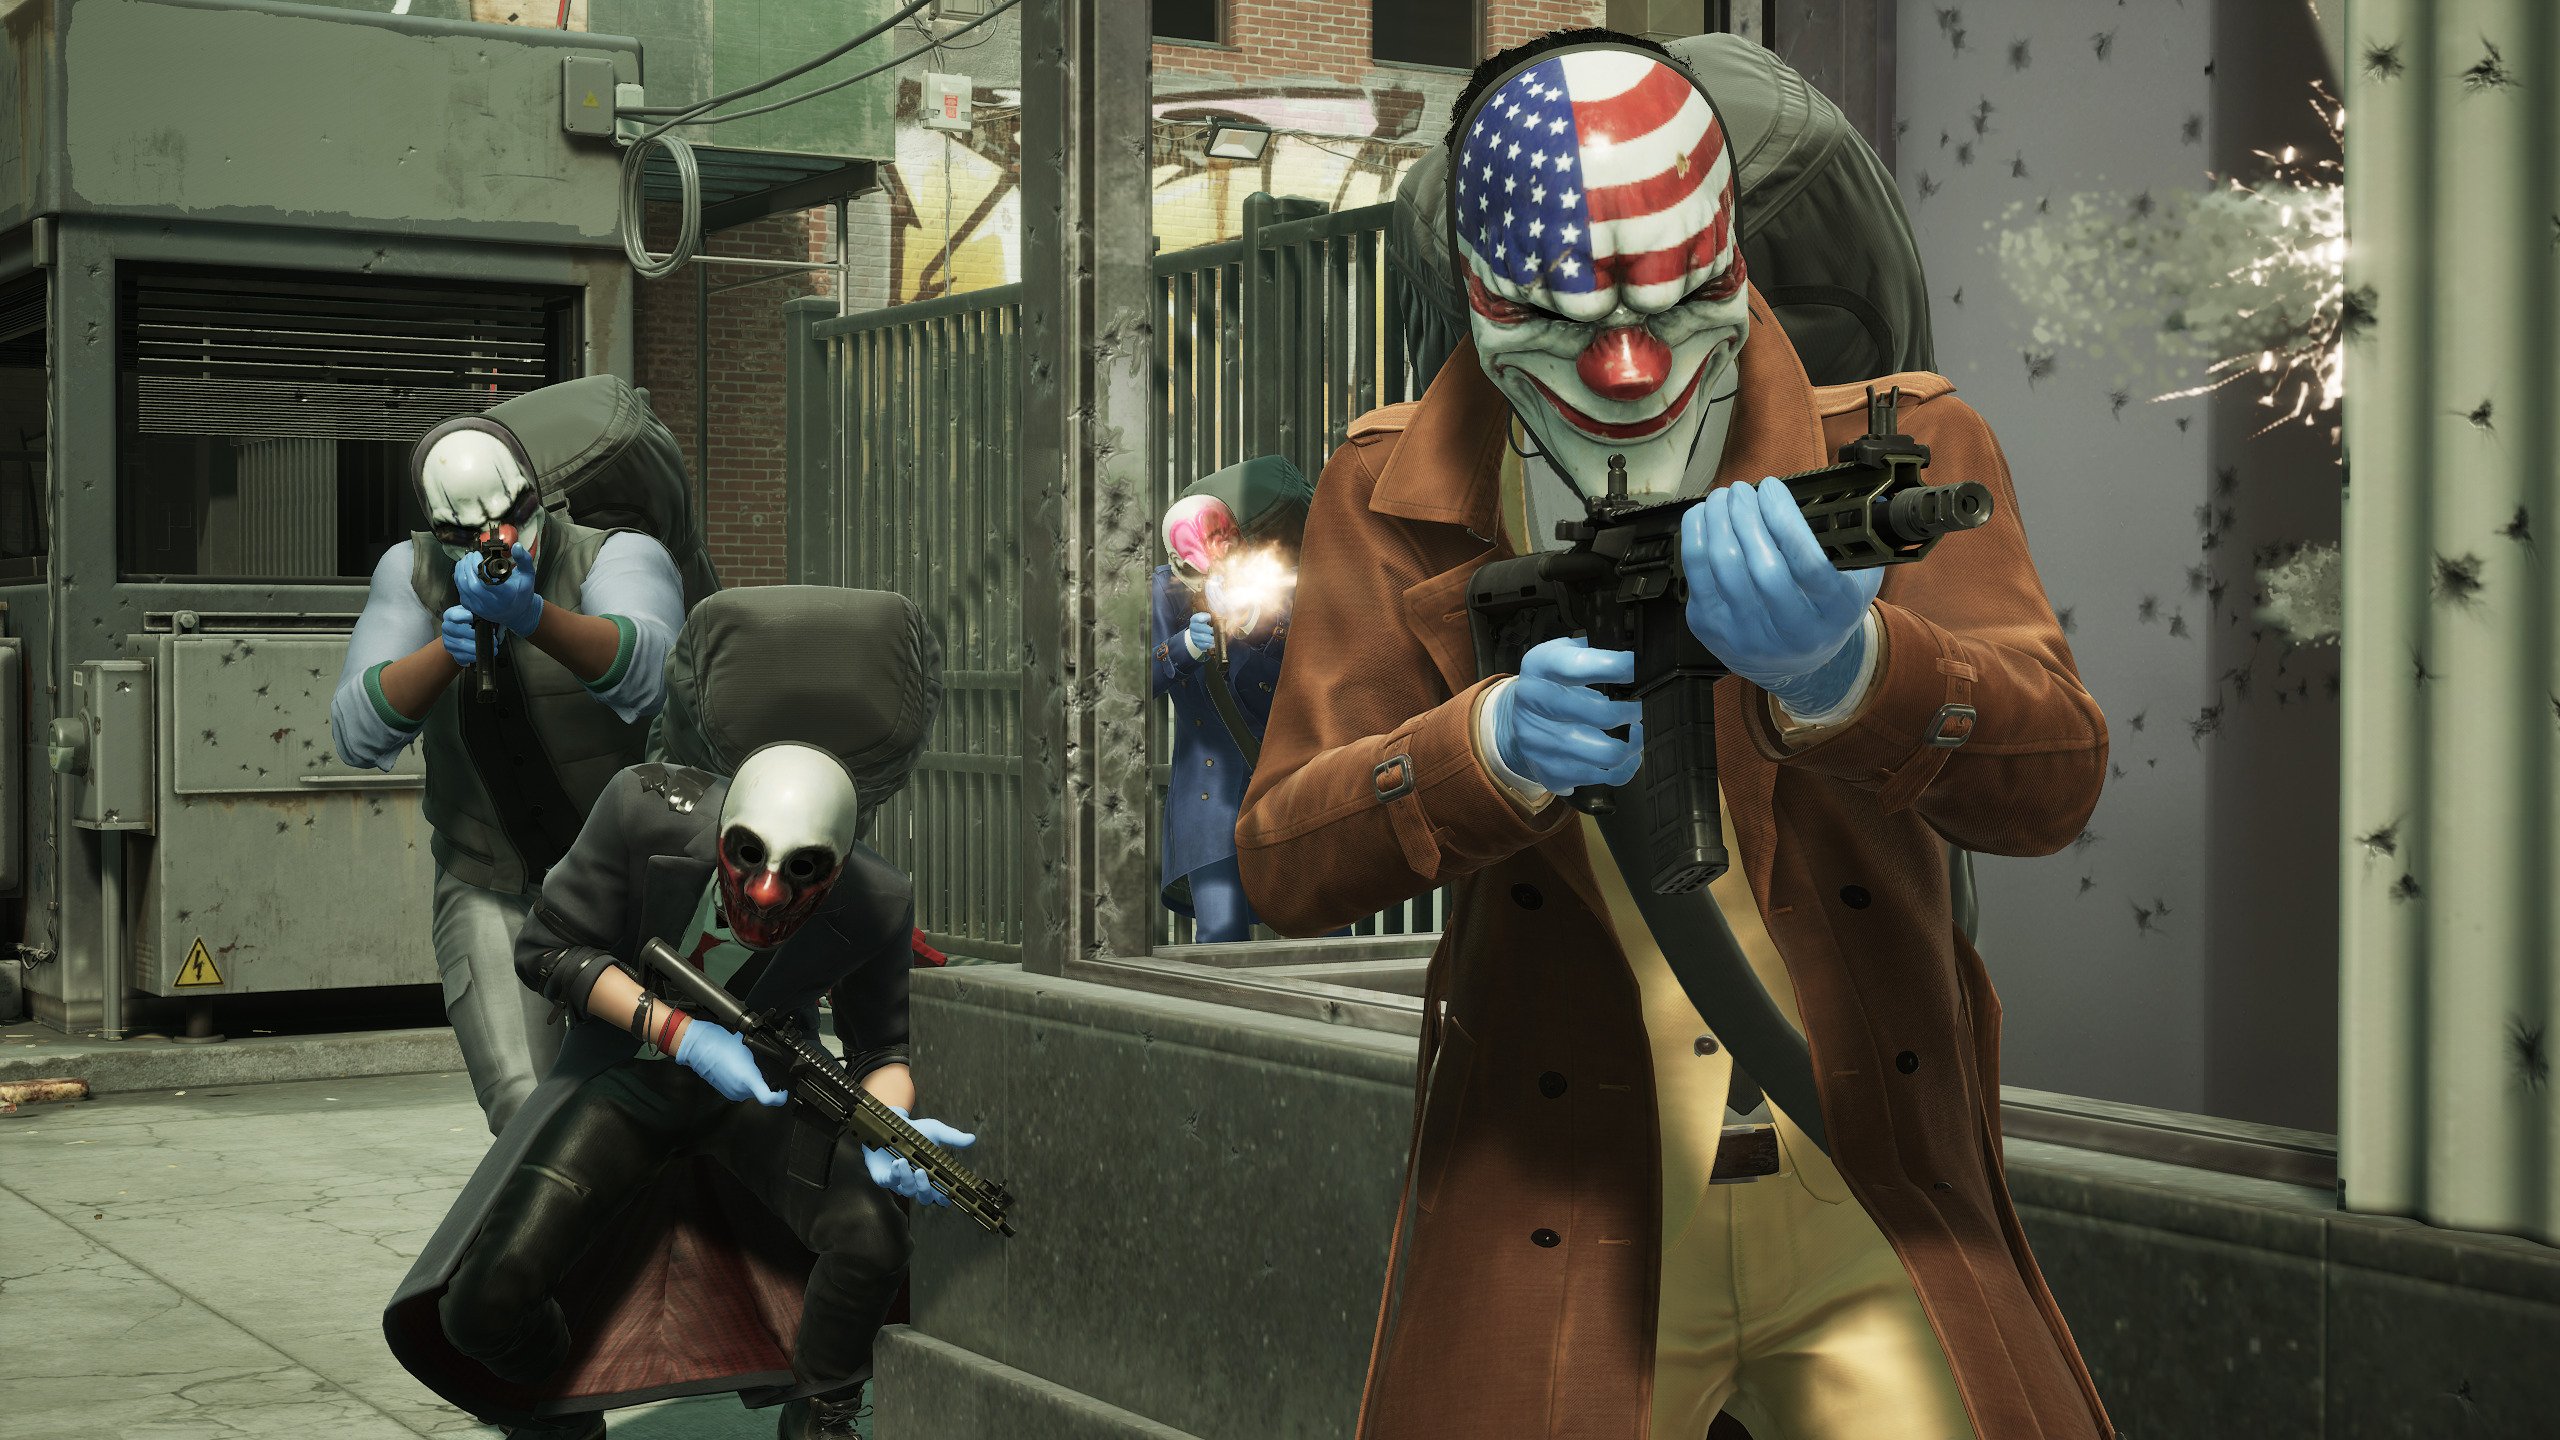 PAYDAY 3: Server downtime today • News • PAYDAY Official Site